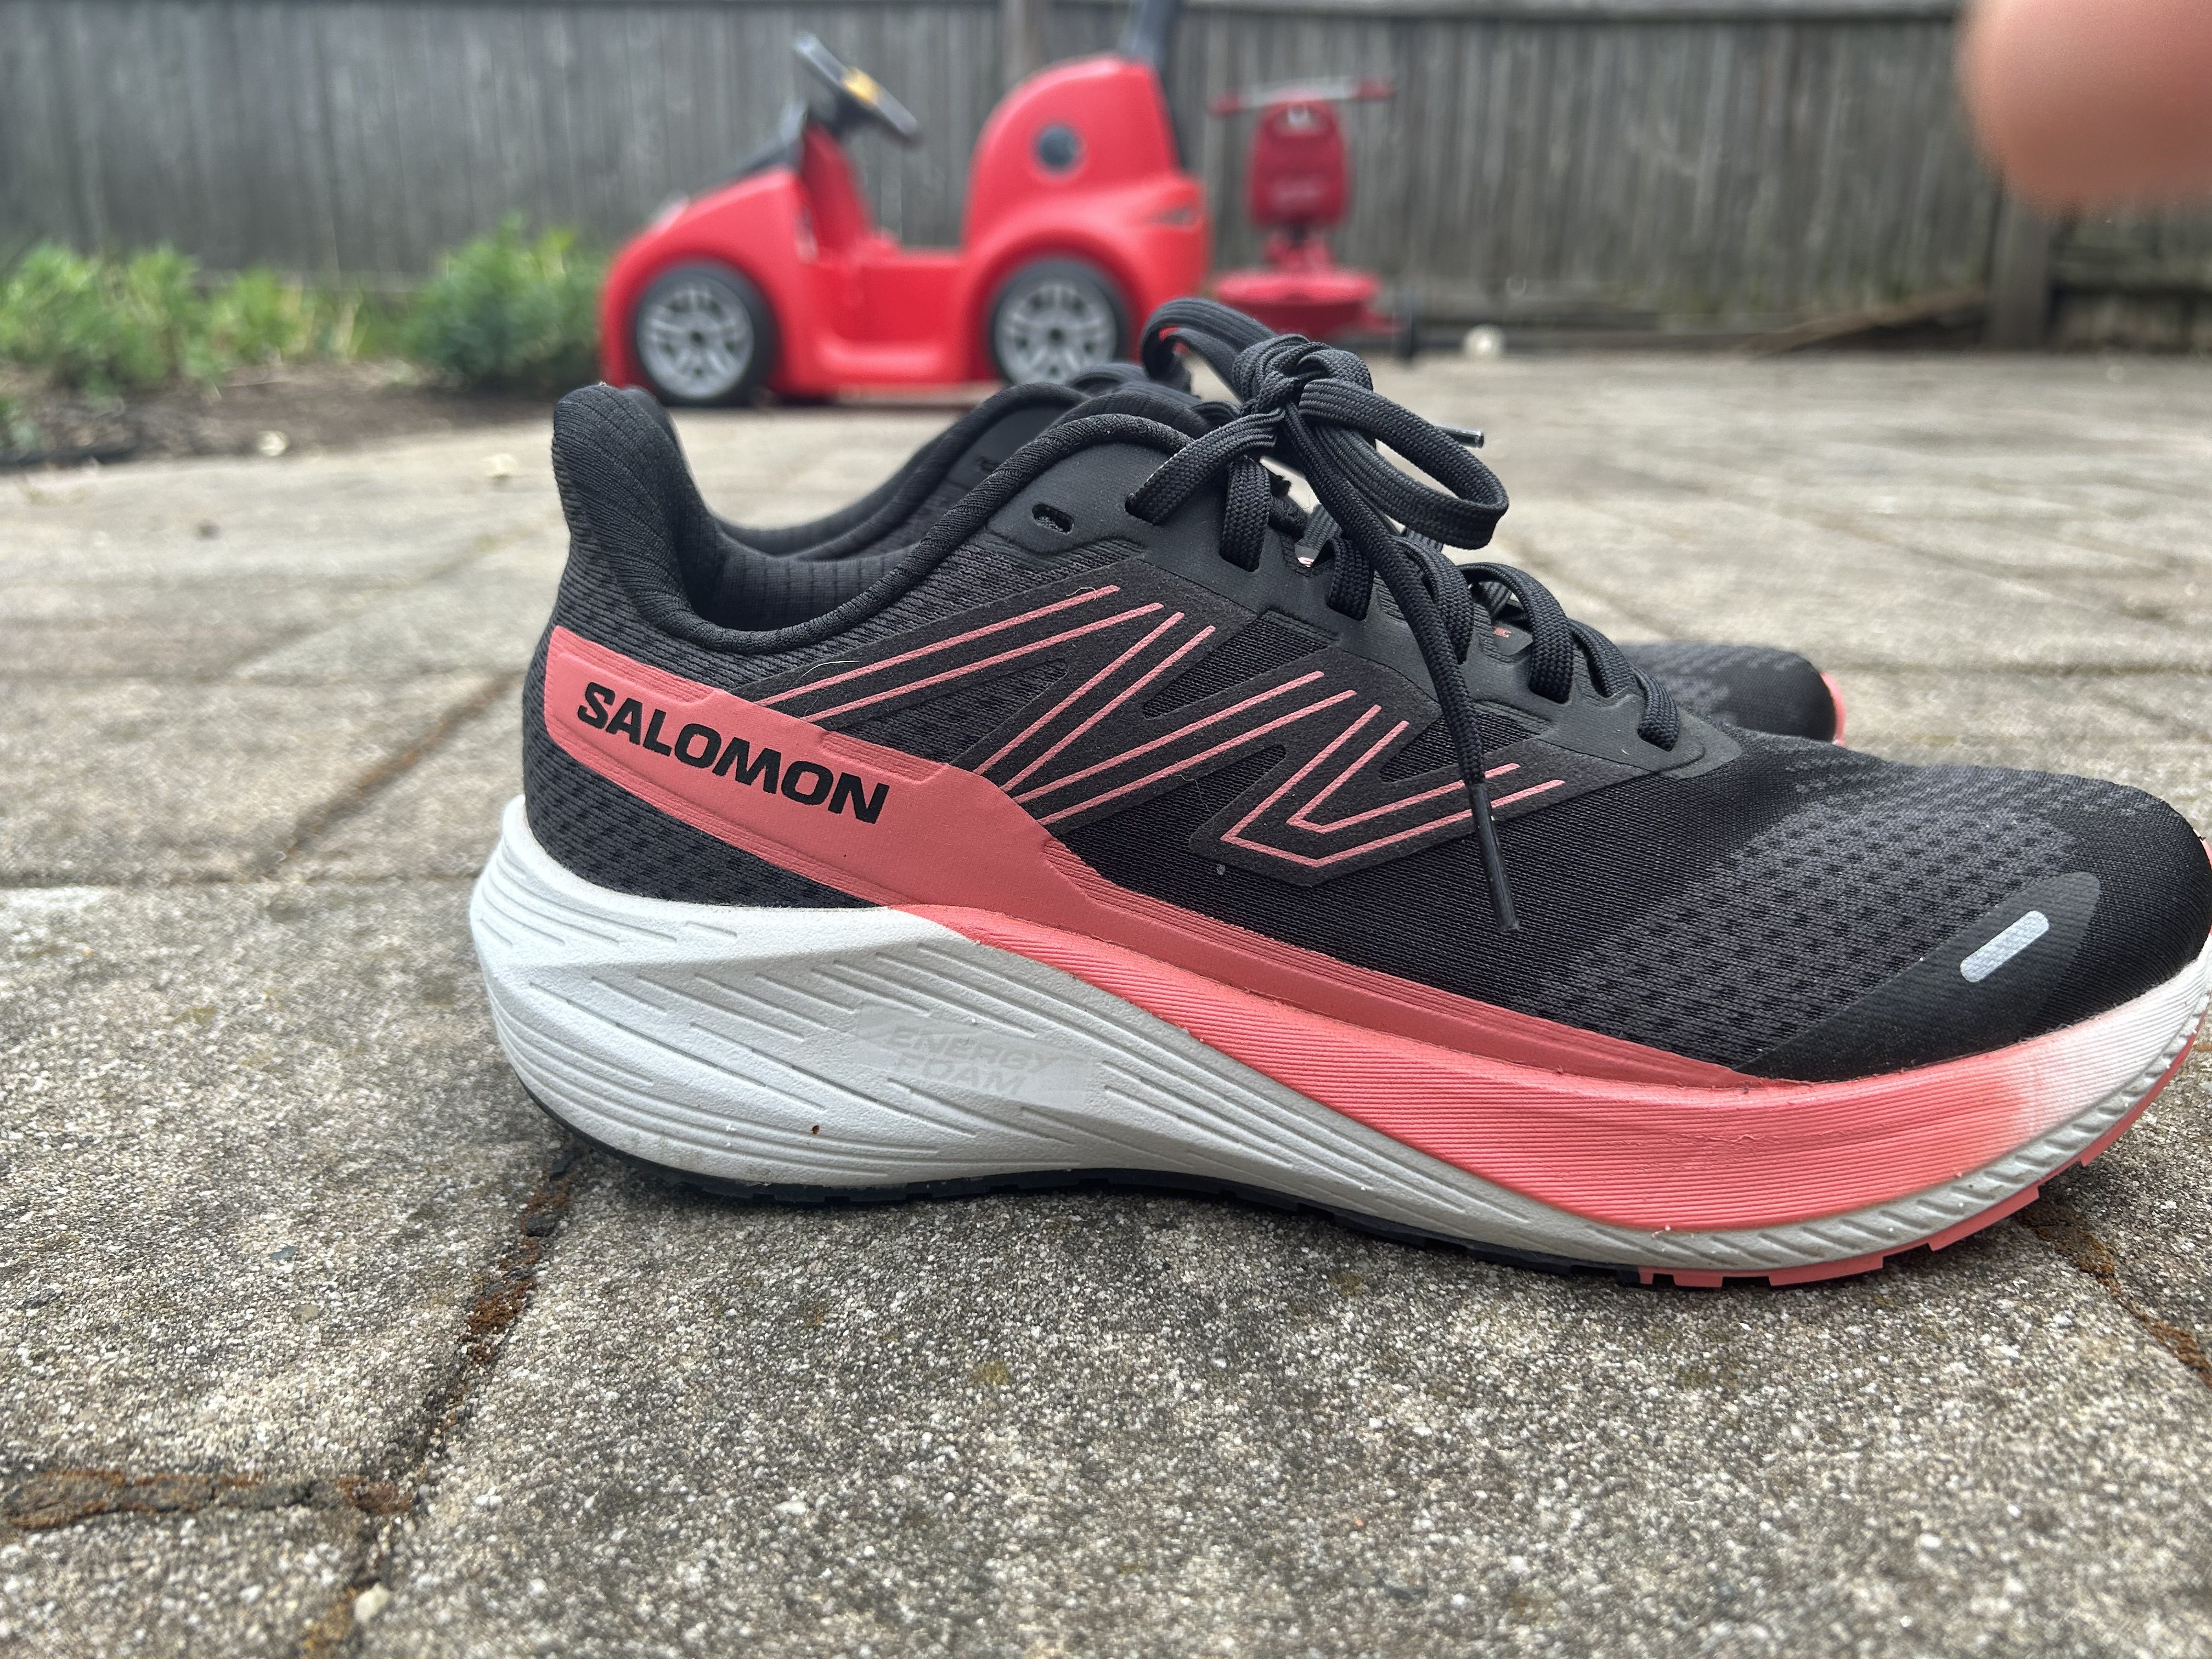 Salomon everyday running shoes: do they stack up to the blue competition? - The Manual